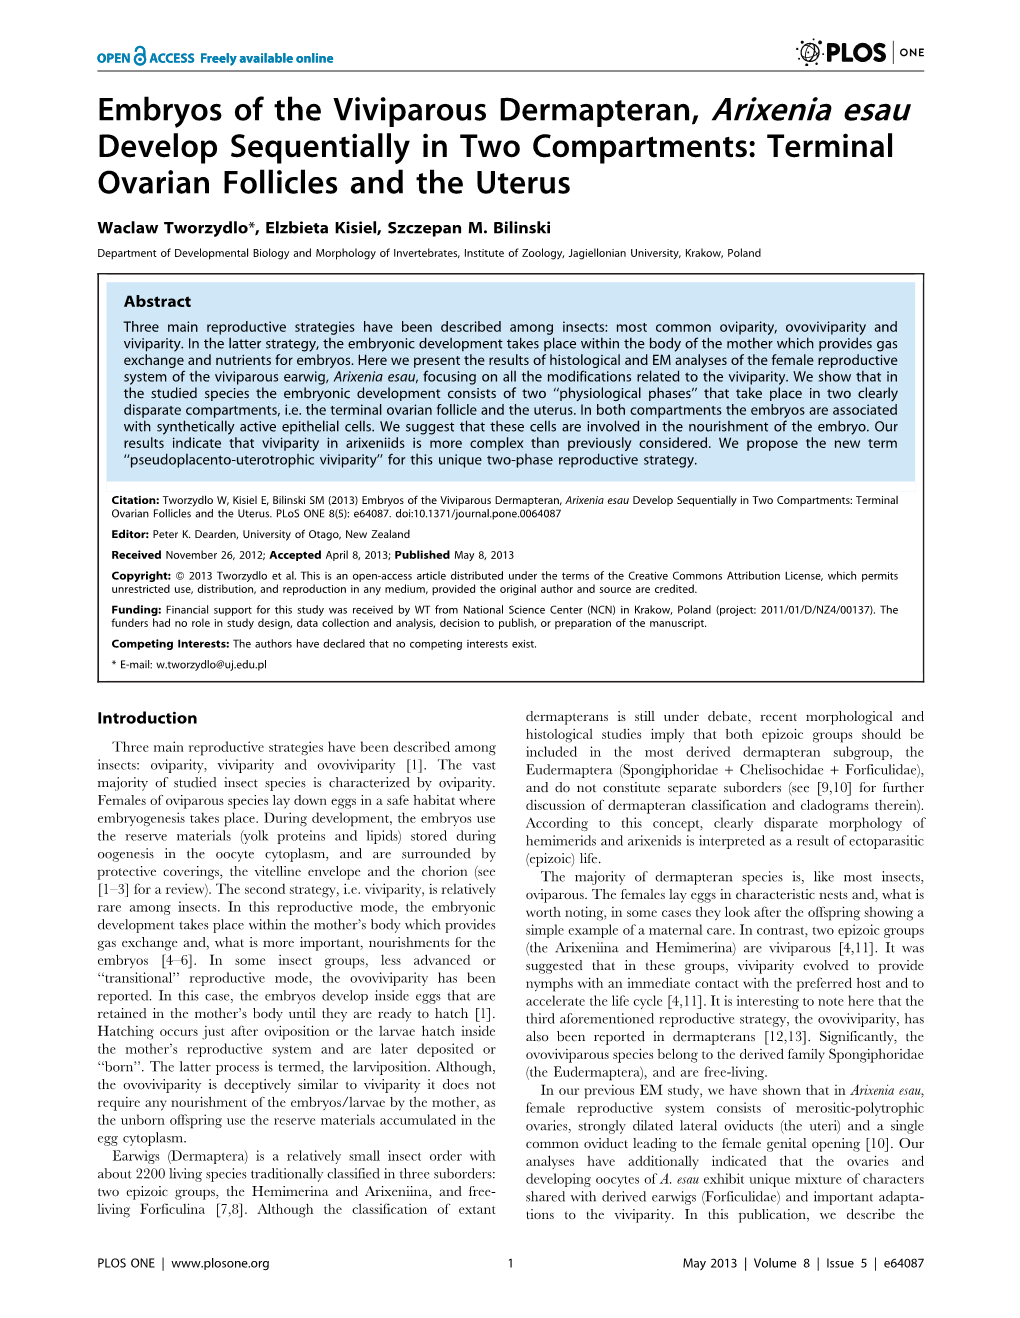 Embryos of the Viviparous Dermapteran, Arixenia Esau Develop Sequentially in Two Compartments: Terminal Ovarian Follicles and the Uterus